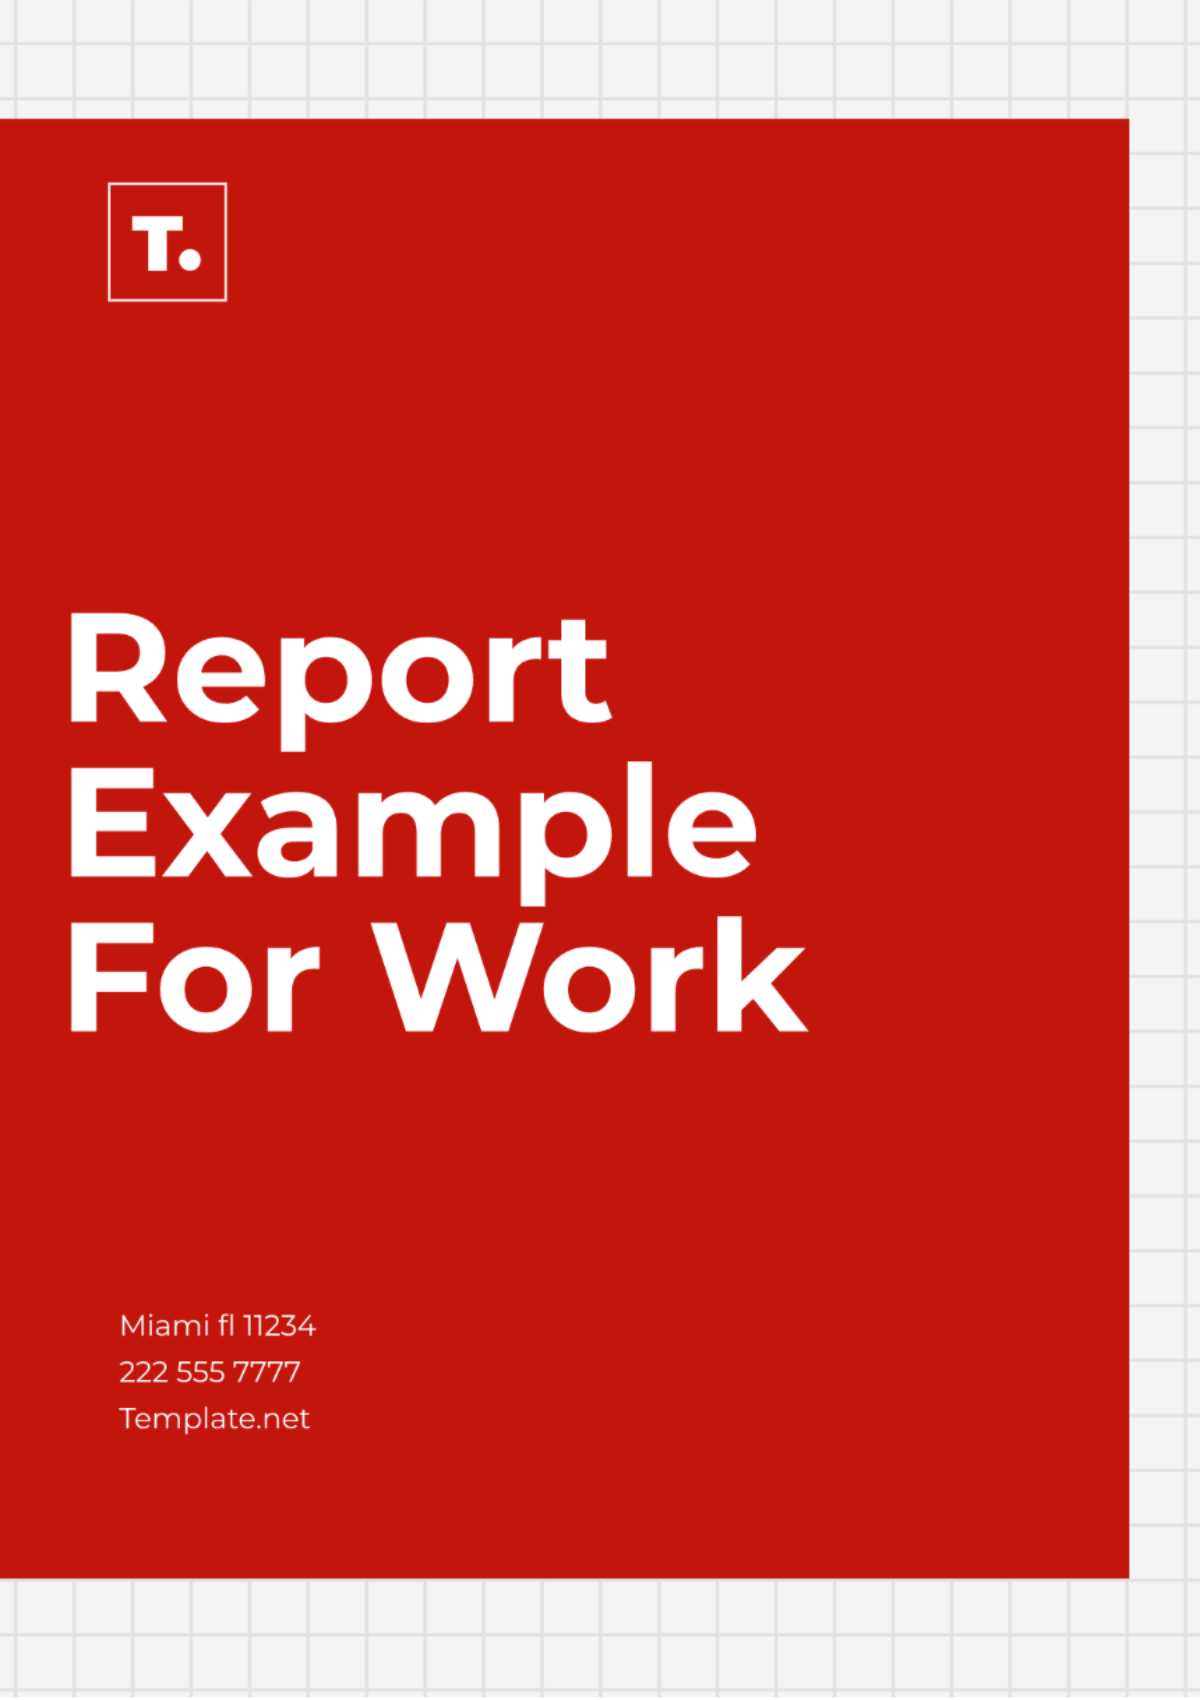 Report Example For Work Template